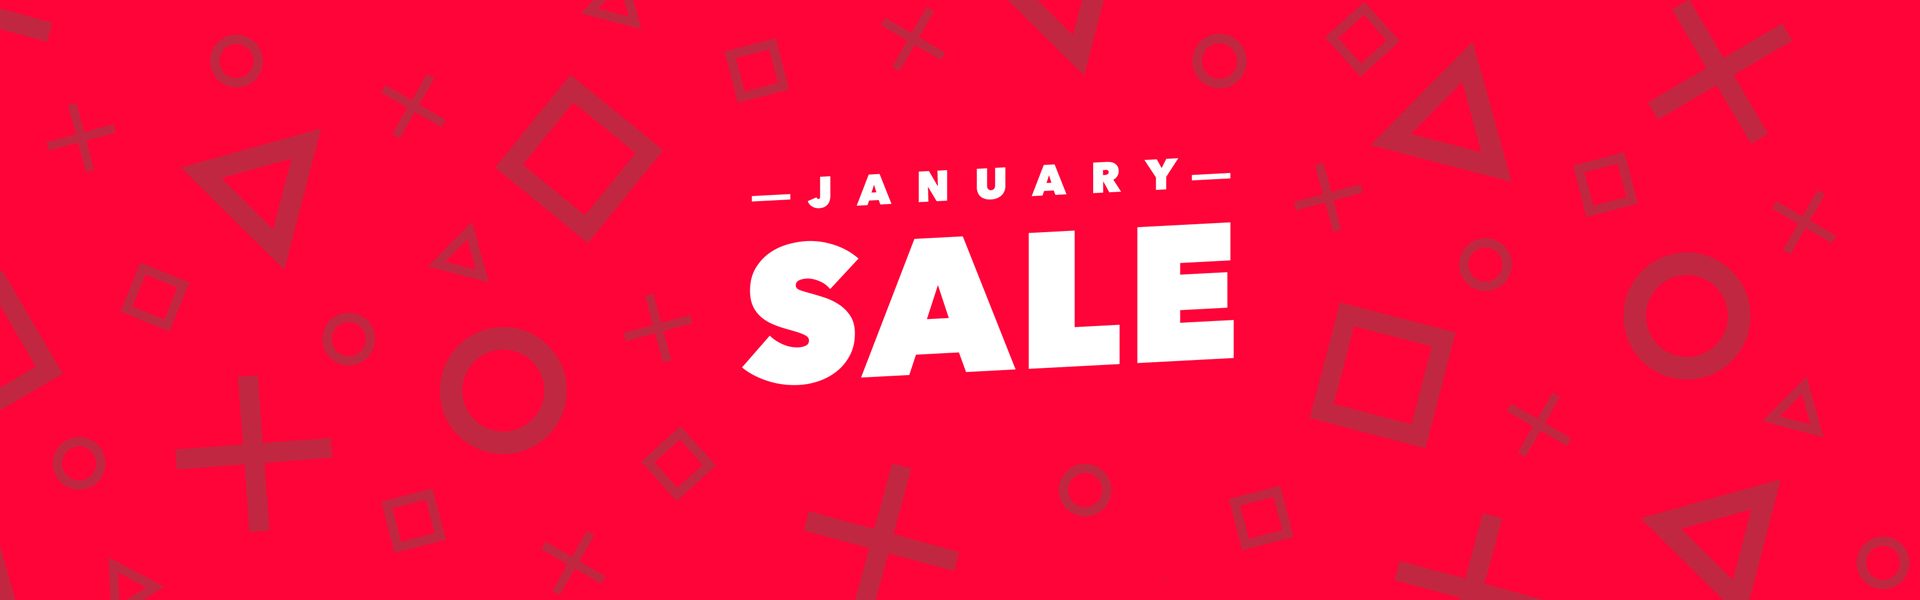 ps store january sale 2019